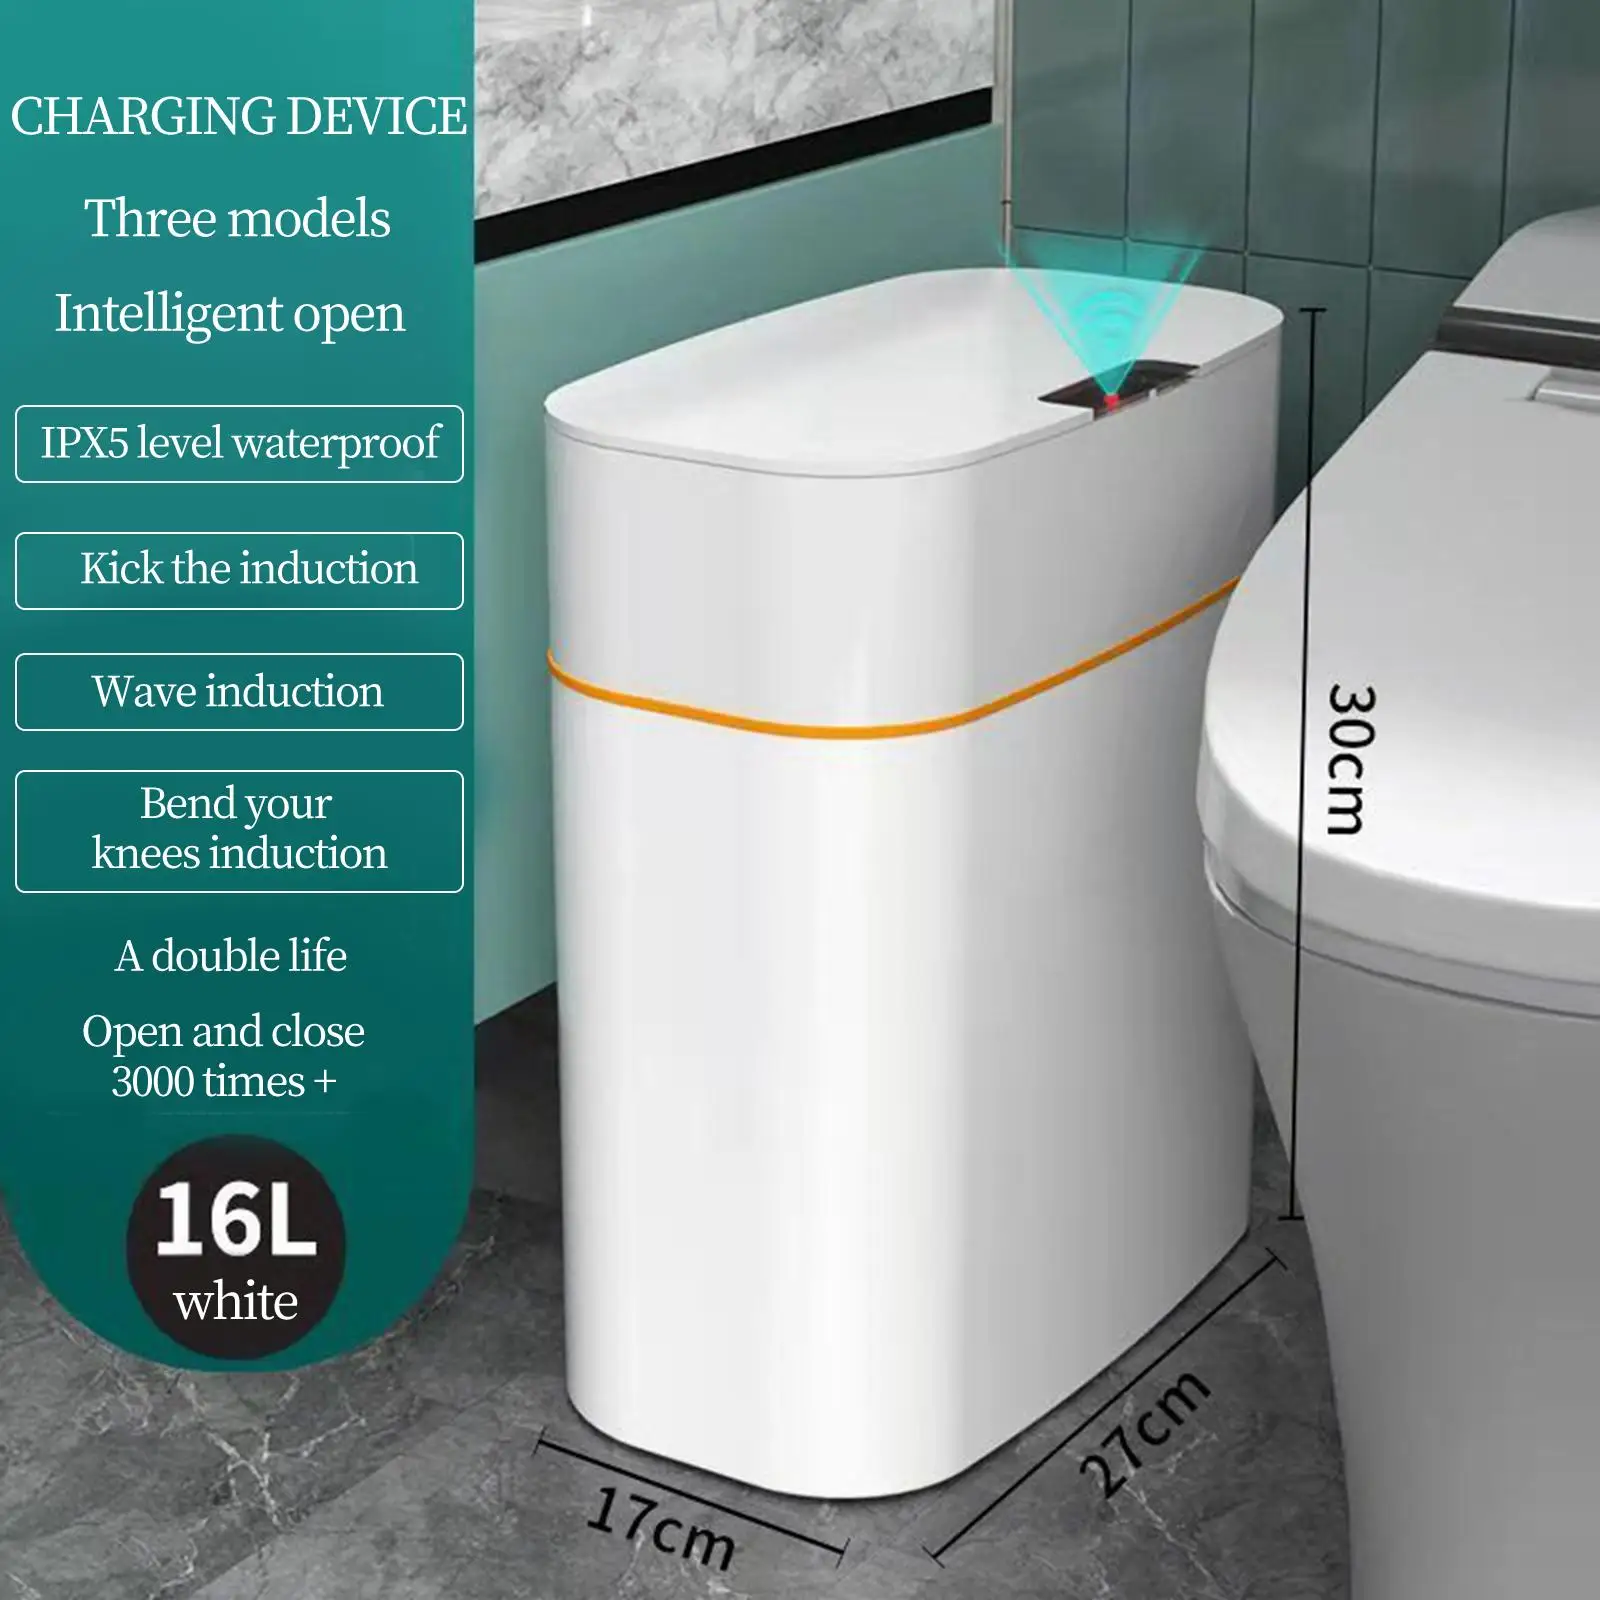 16L Household Dustbin Touchless Automatic Smart Trash Can for Study Bedroom